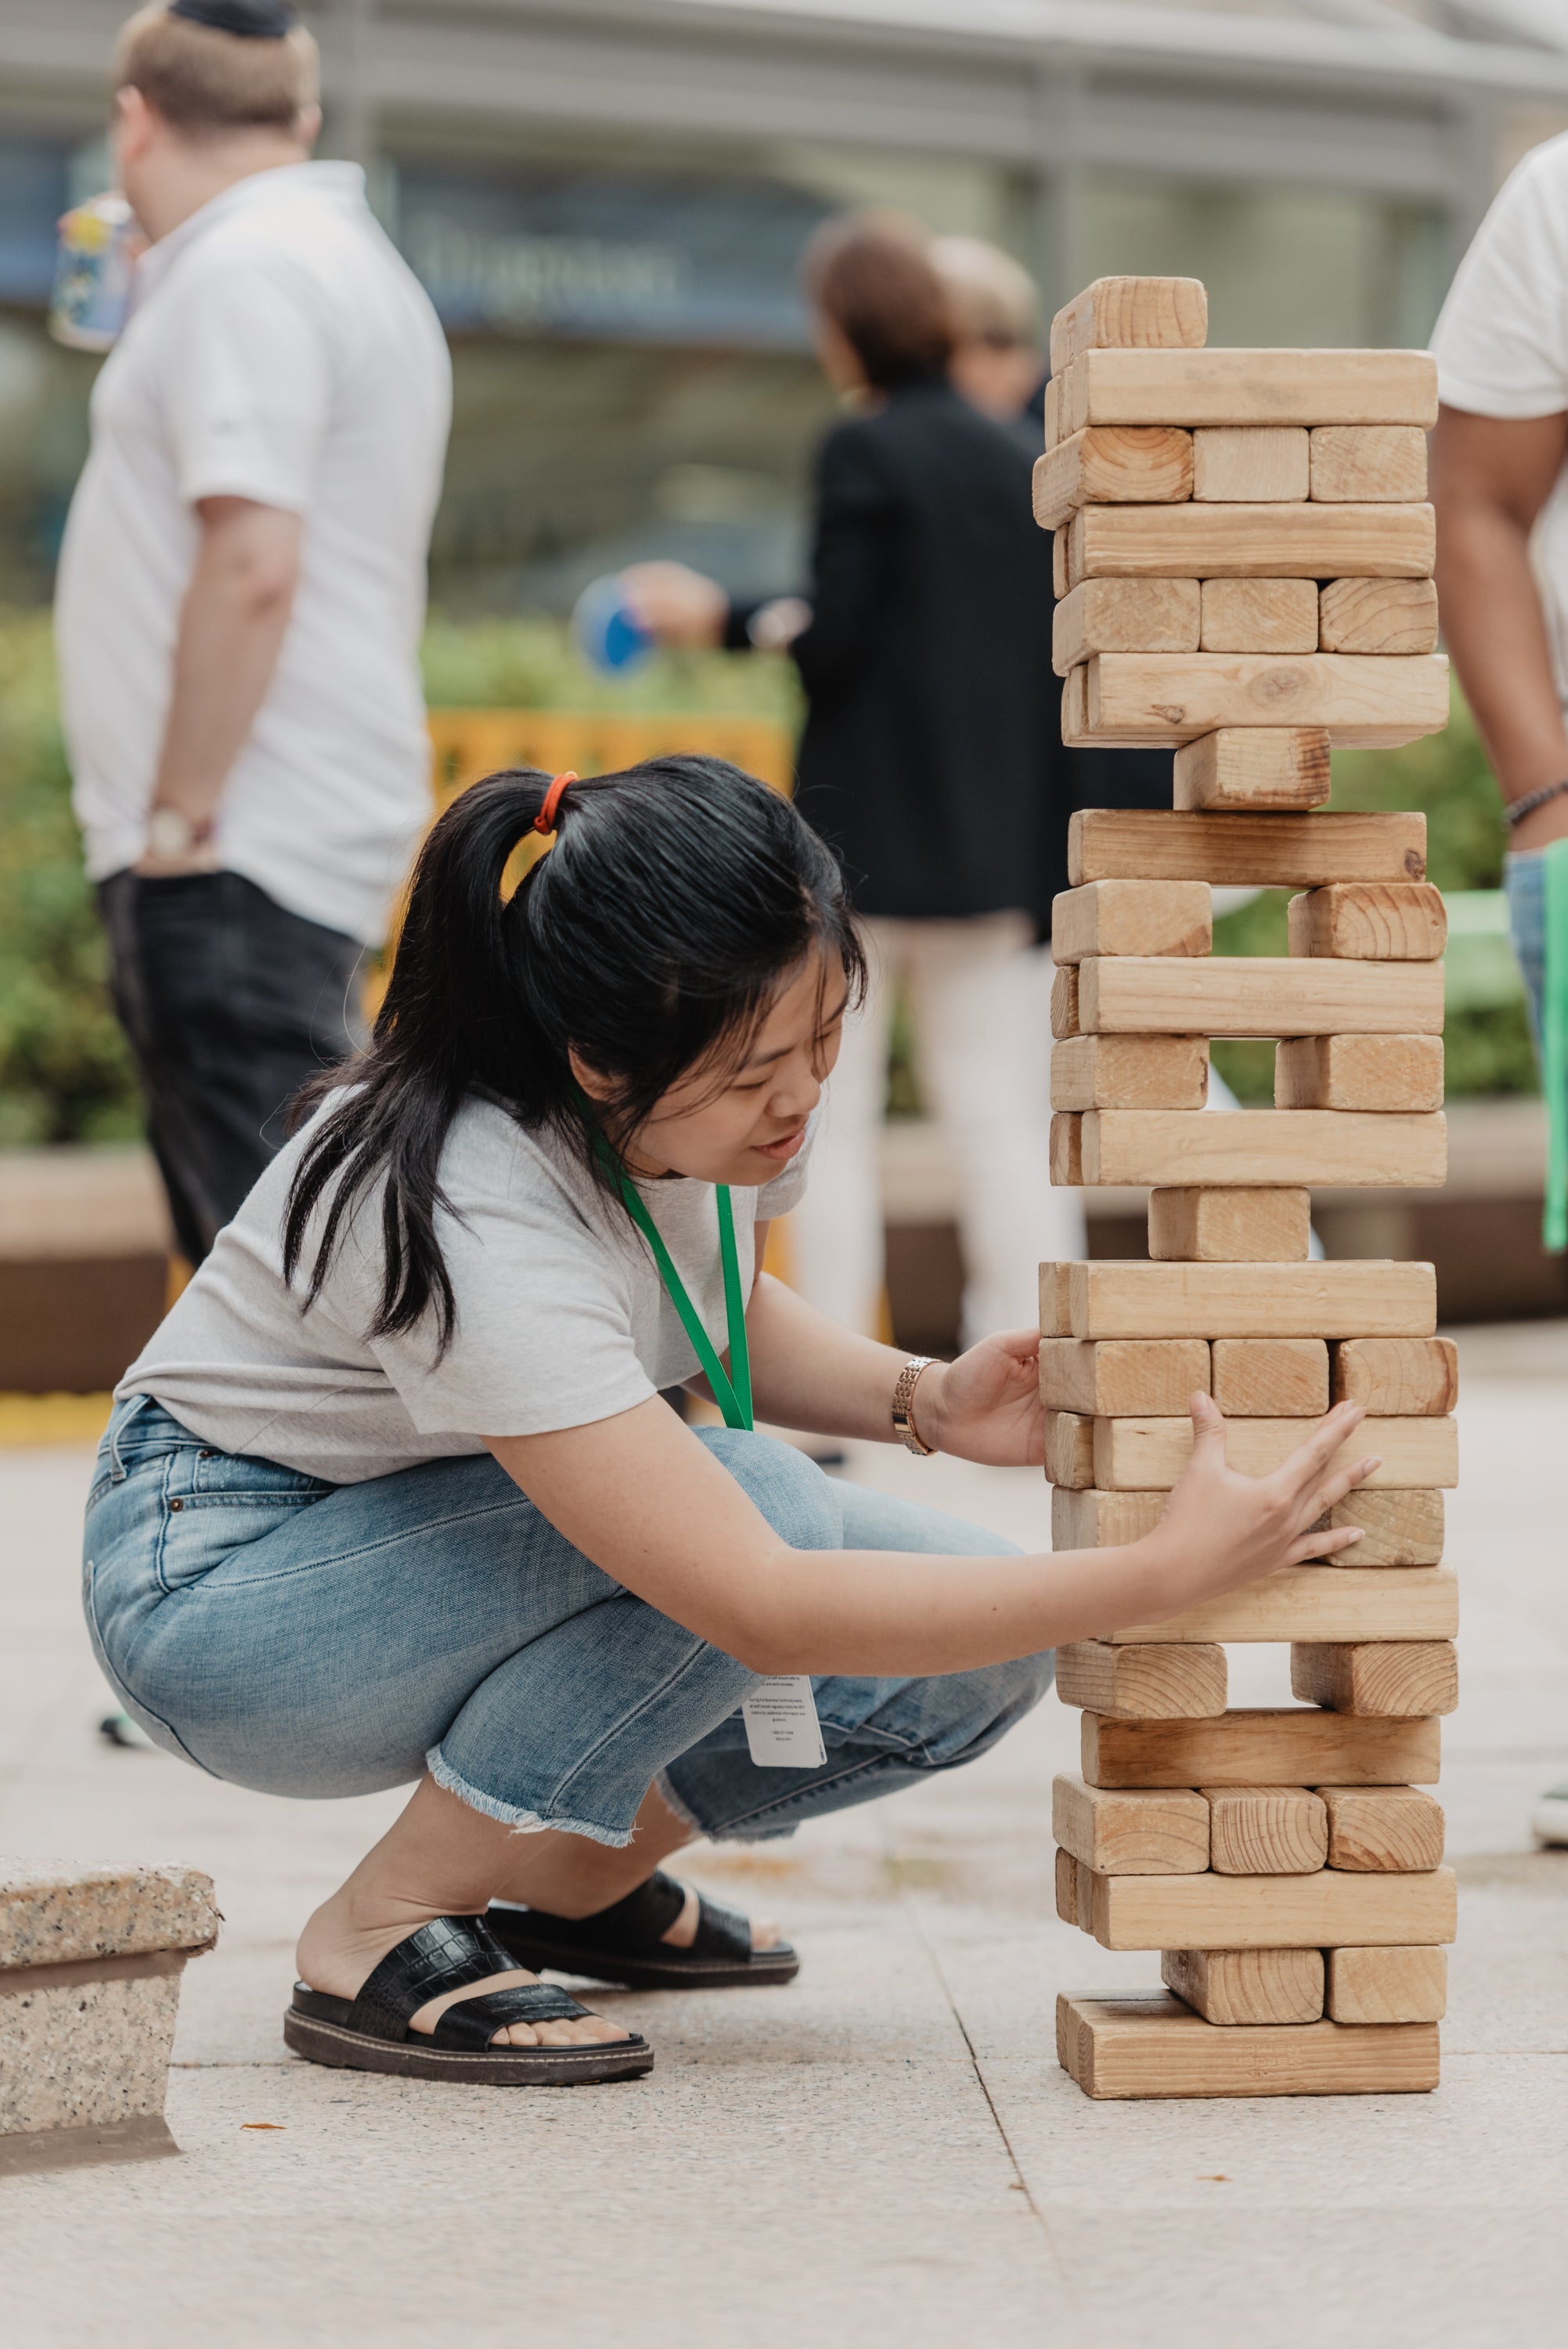 Questrade co-op student playing jenga